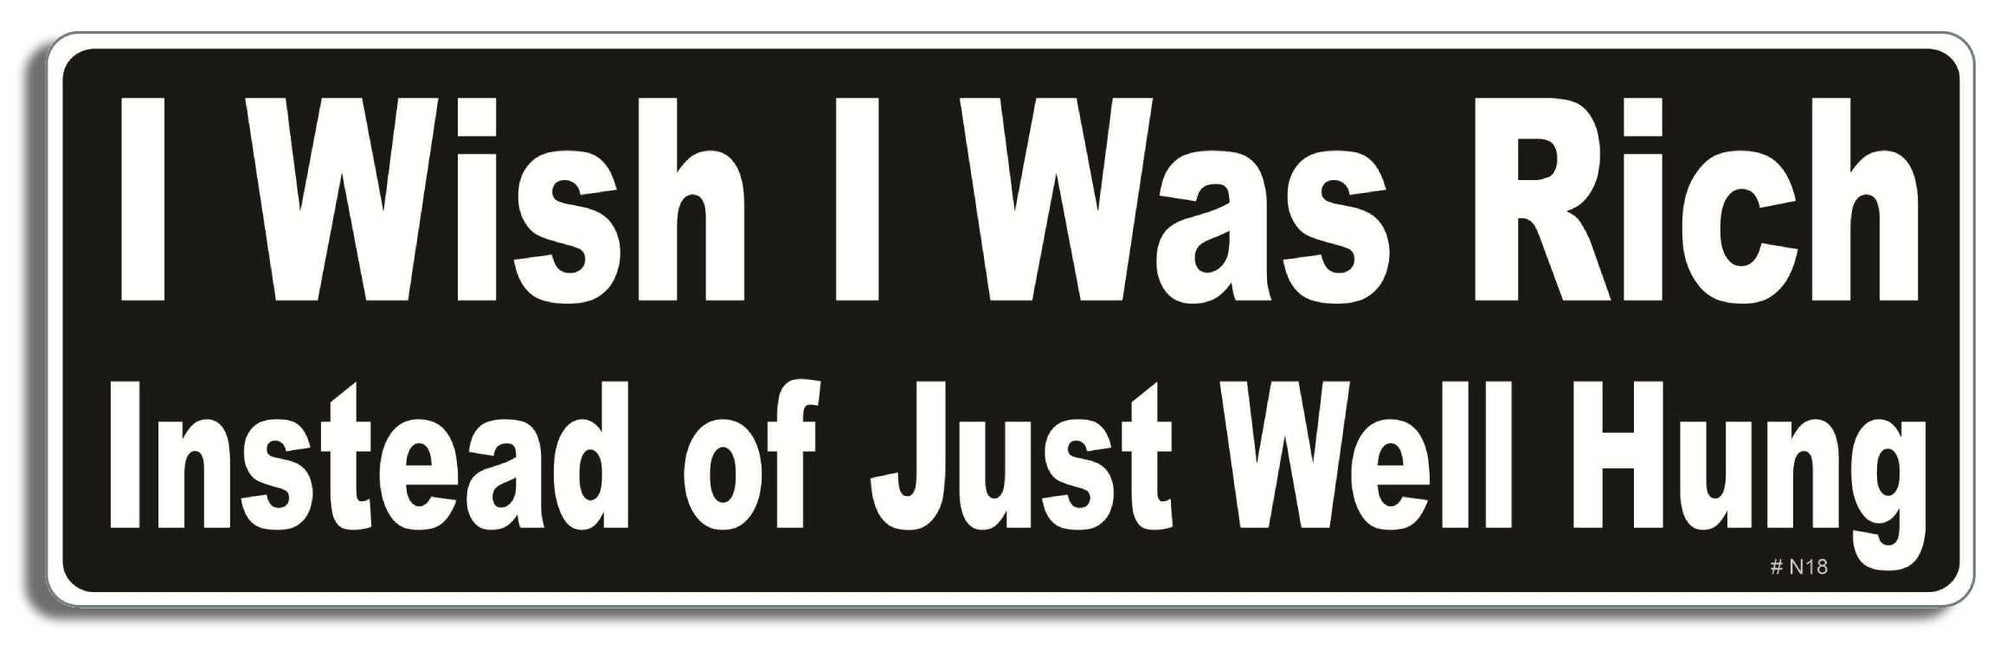 I wish I was rich instead of just well hung - 3" x 10" Bumper Sticker--Car Magnet- -  Decal Bumper Sticker-dirty Bumper Sticker Car Magnet I wish I was rich instead of just-  Decal for carsadult, funny, funny quote, funny saying, naughty